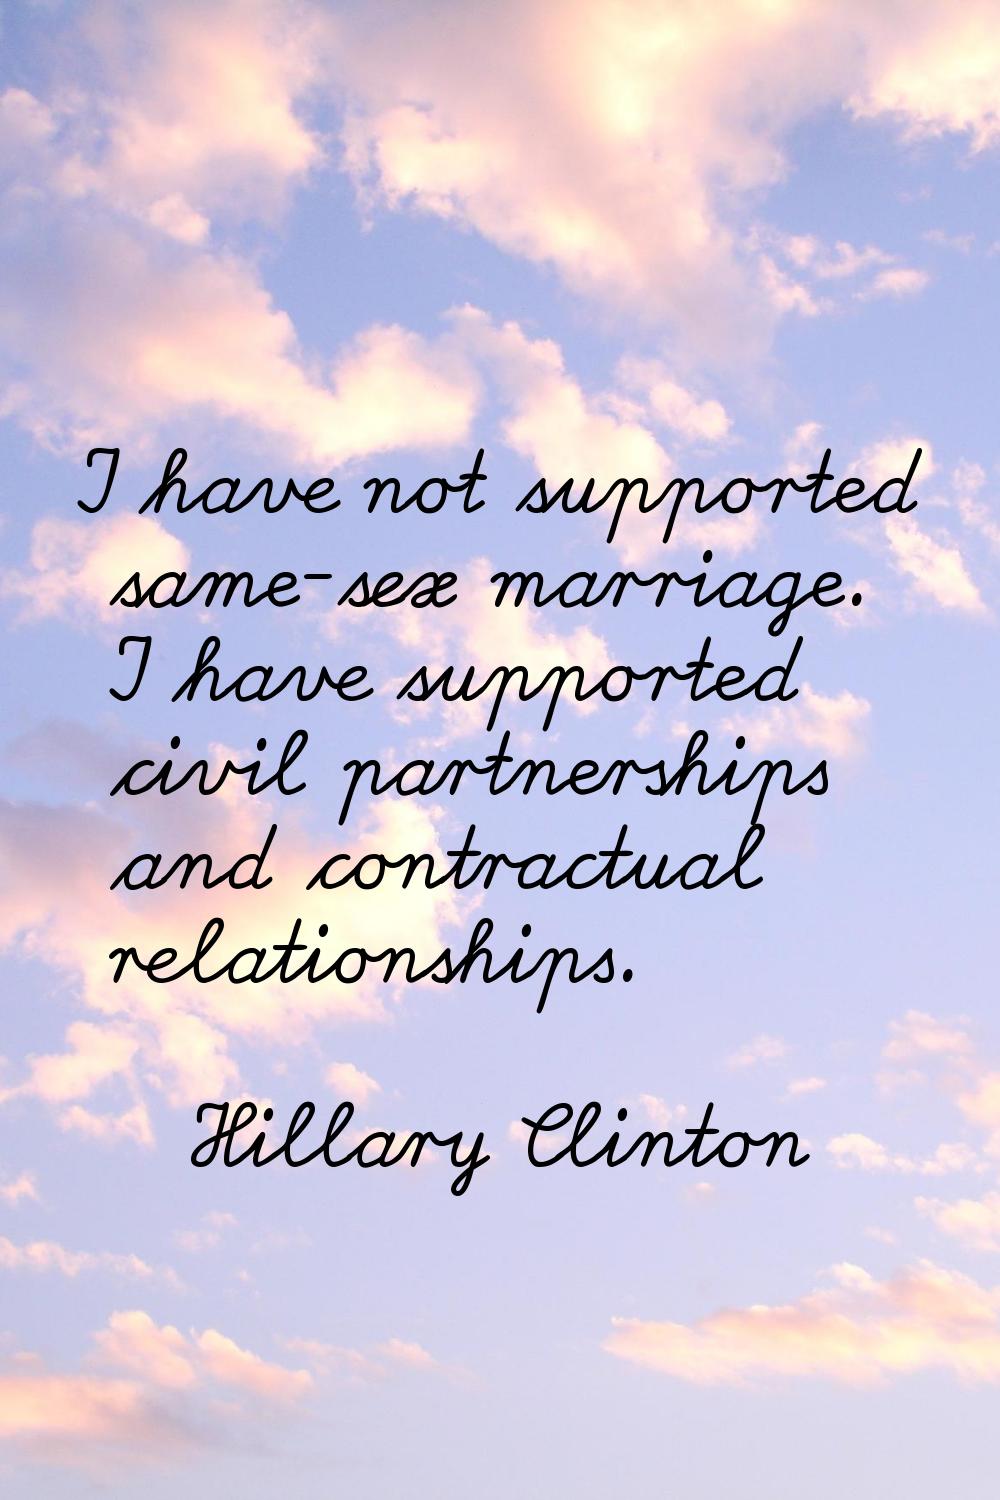 I have not supported same-sex marriage. I have supported civil partnerships and contractual relatio